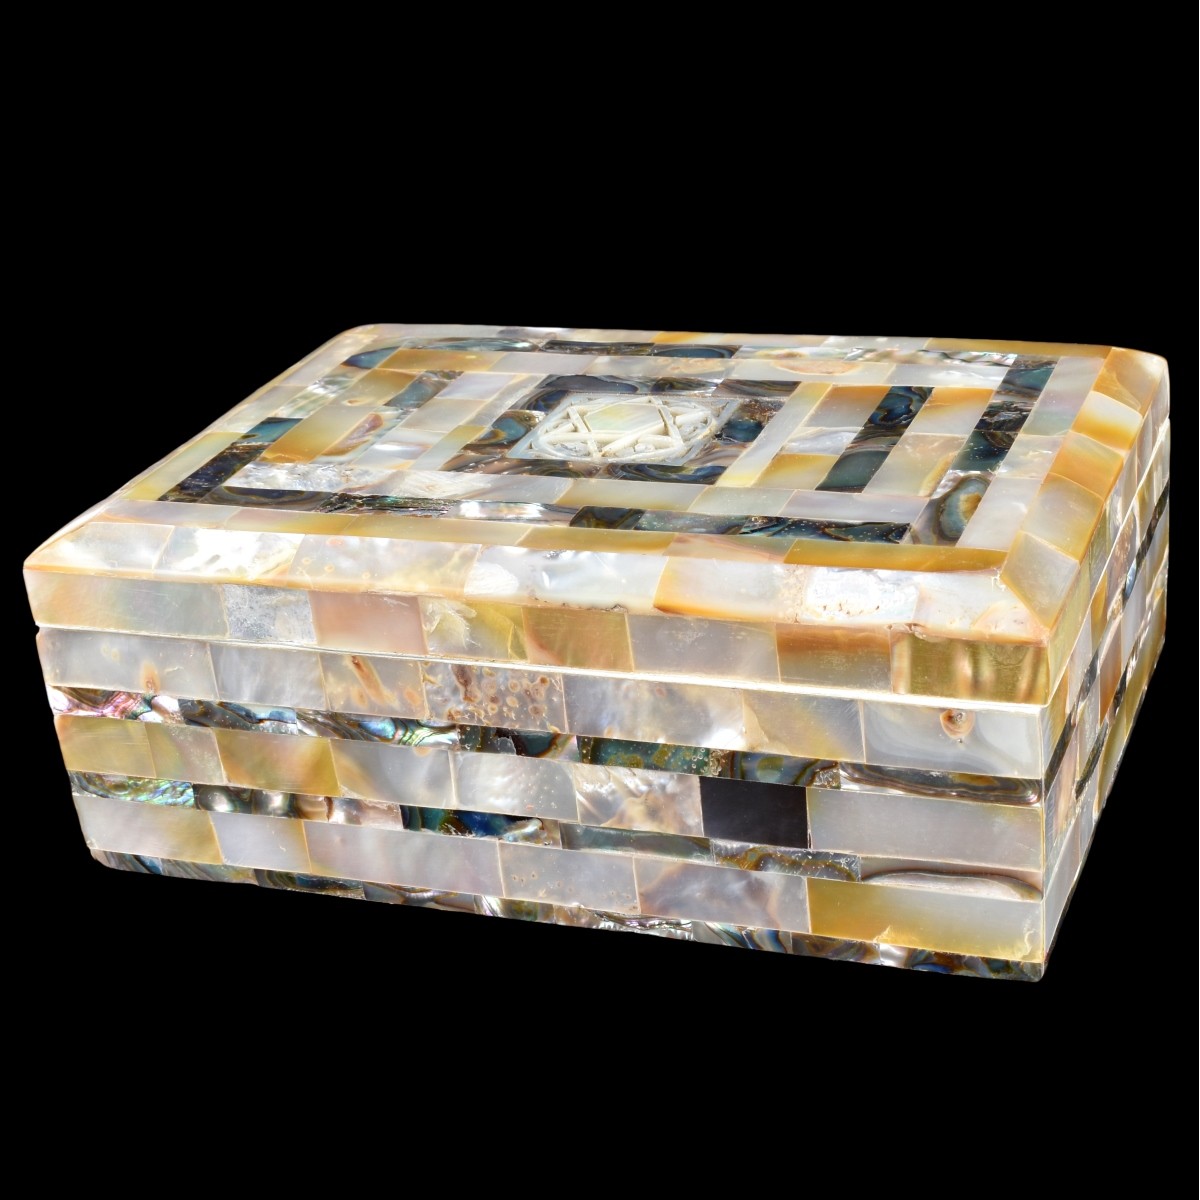 Antique Mother of Pearl - Abalone Inlaid Box